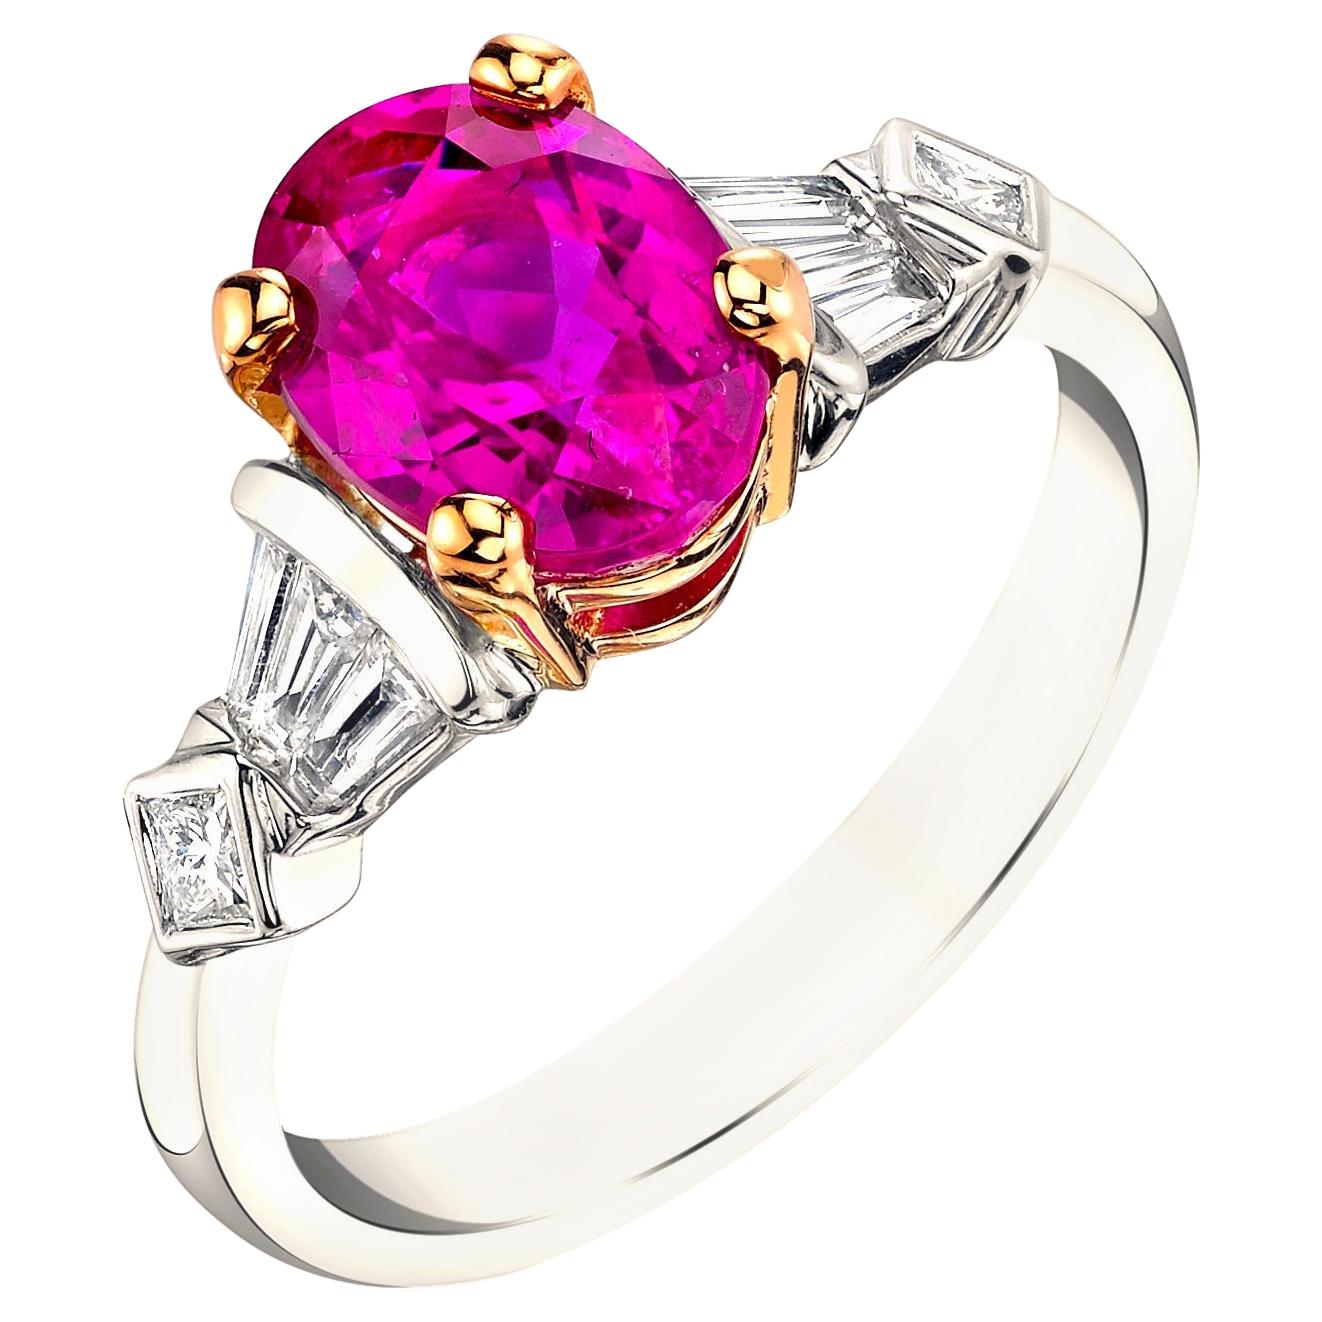 2.79 Carat Pink Sapphire Oval Diamond White and Rose Gold Engagement Ring